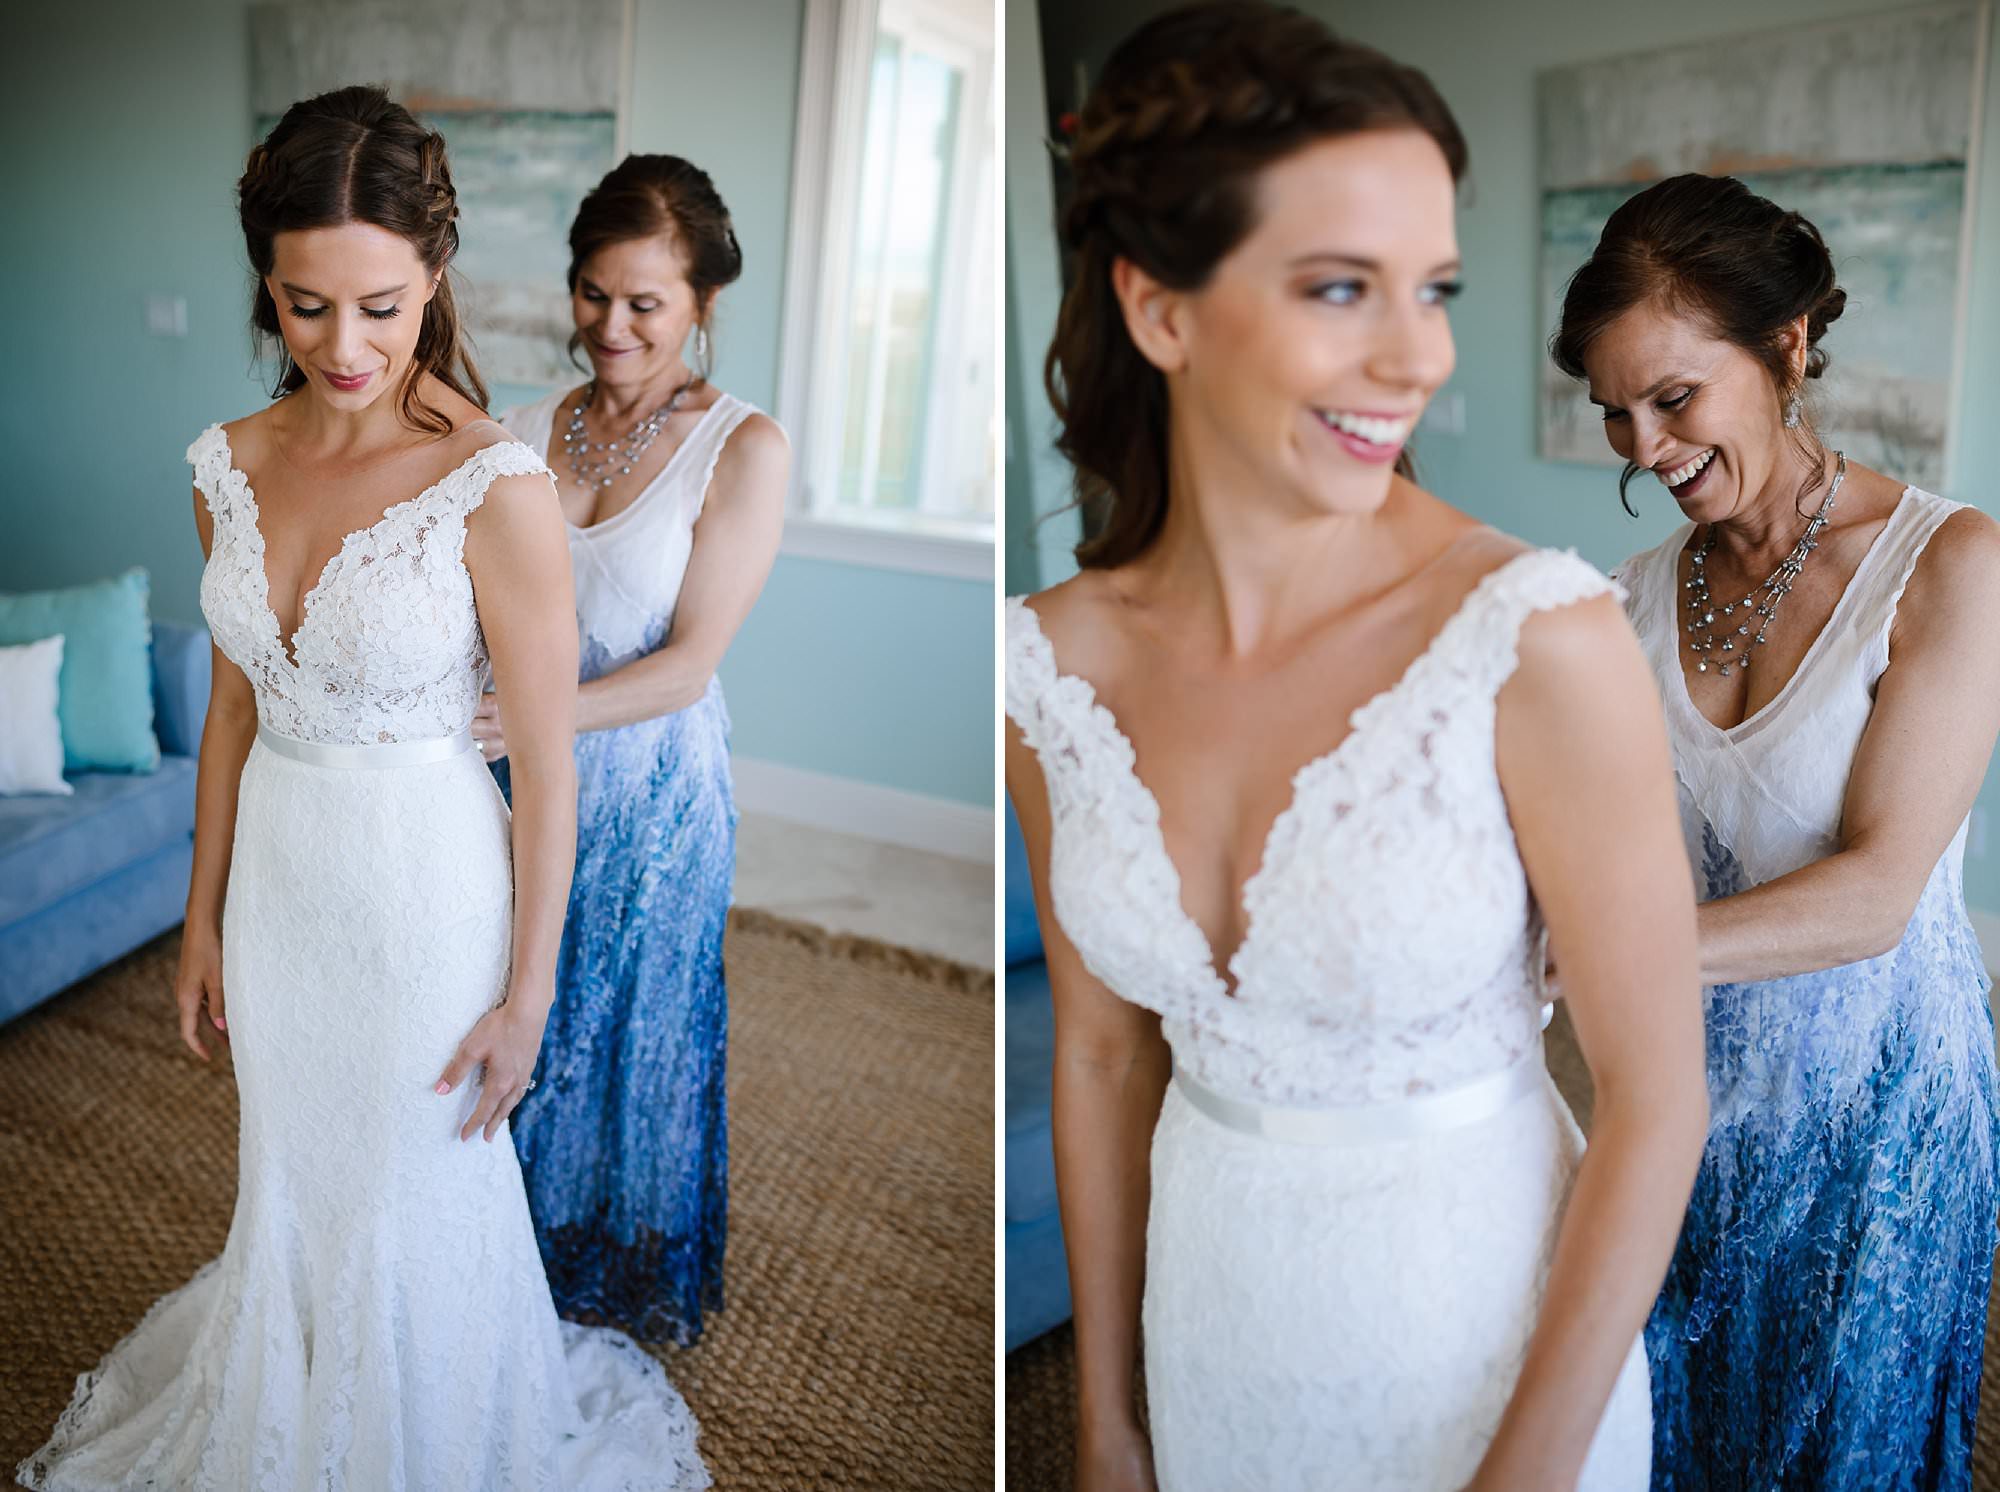 Mother of bride zipping up wedding gown